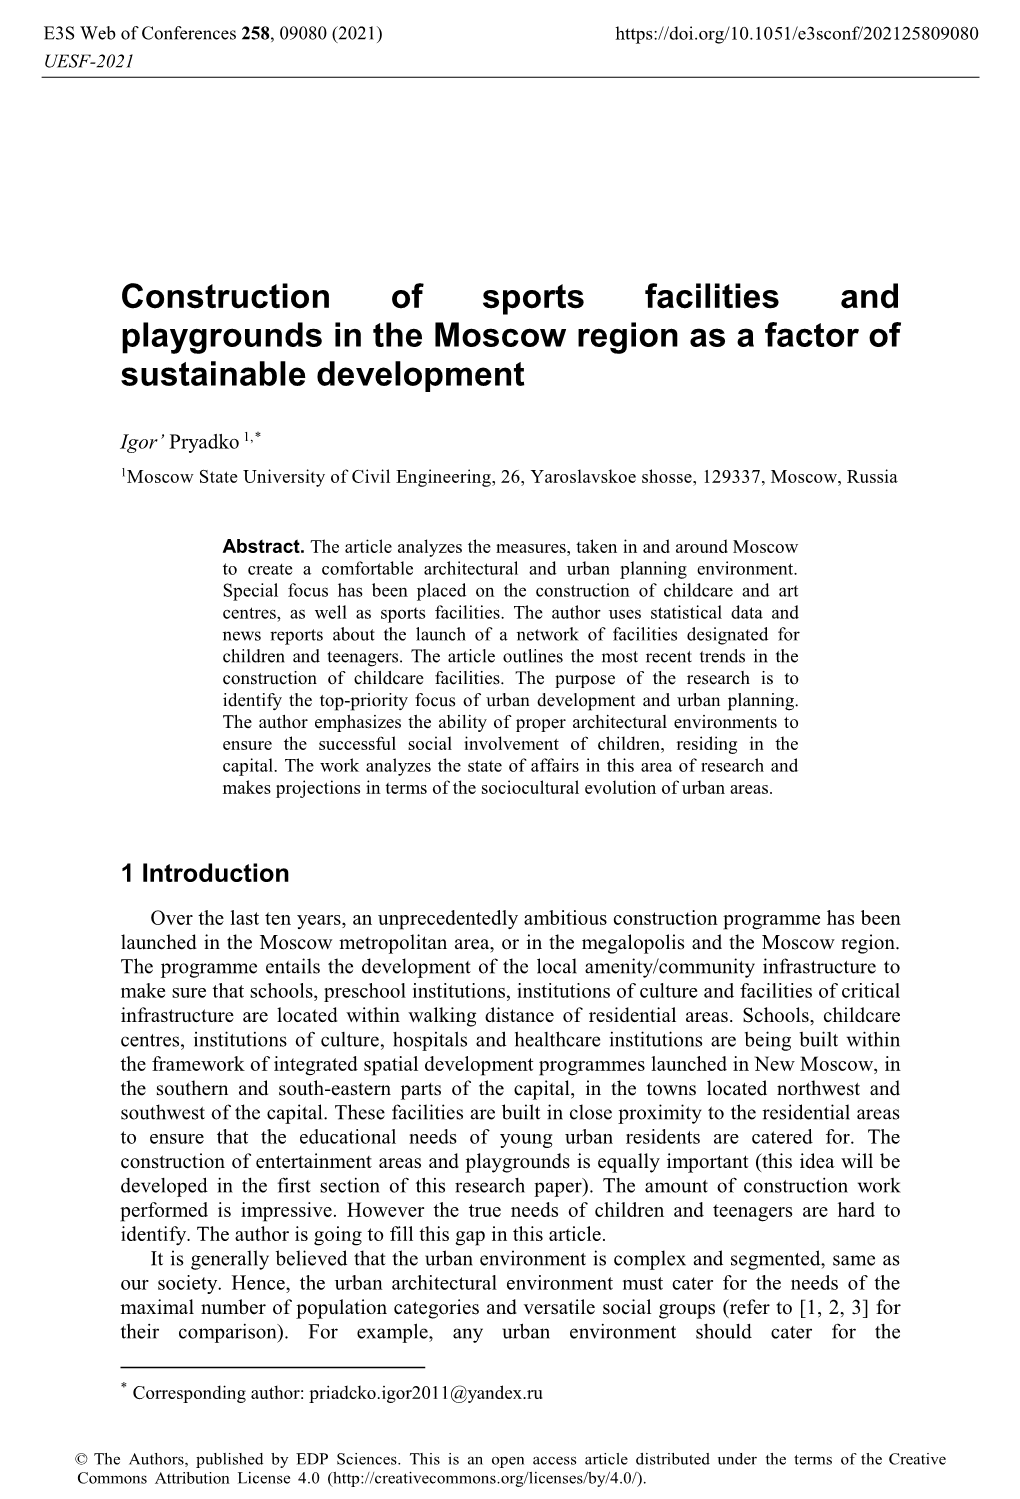 Construction of Sports Facilities and Playgrounds in the Moscow Region As a Factor of Sustainable Development